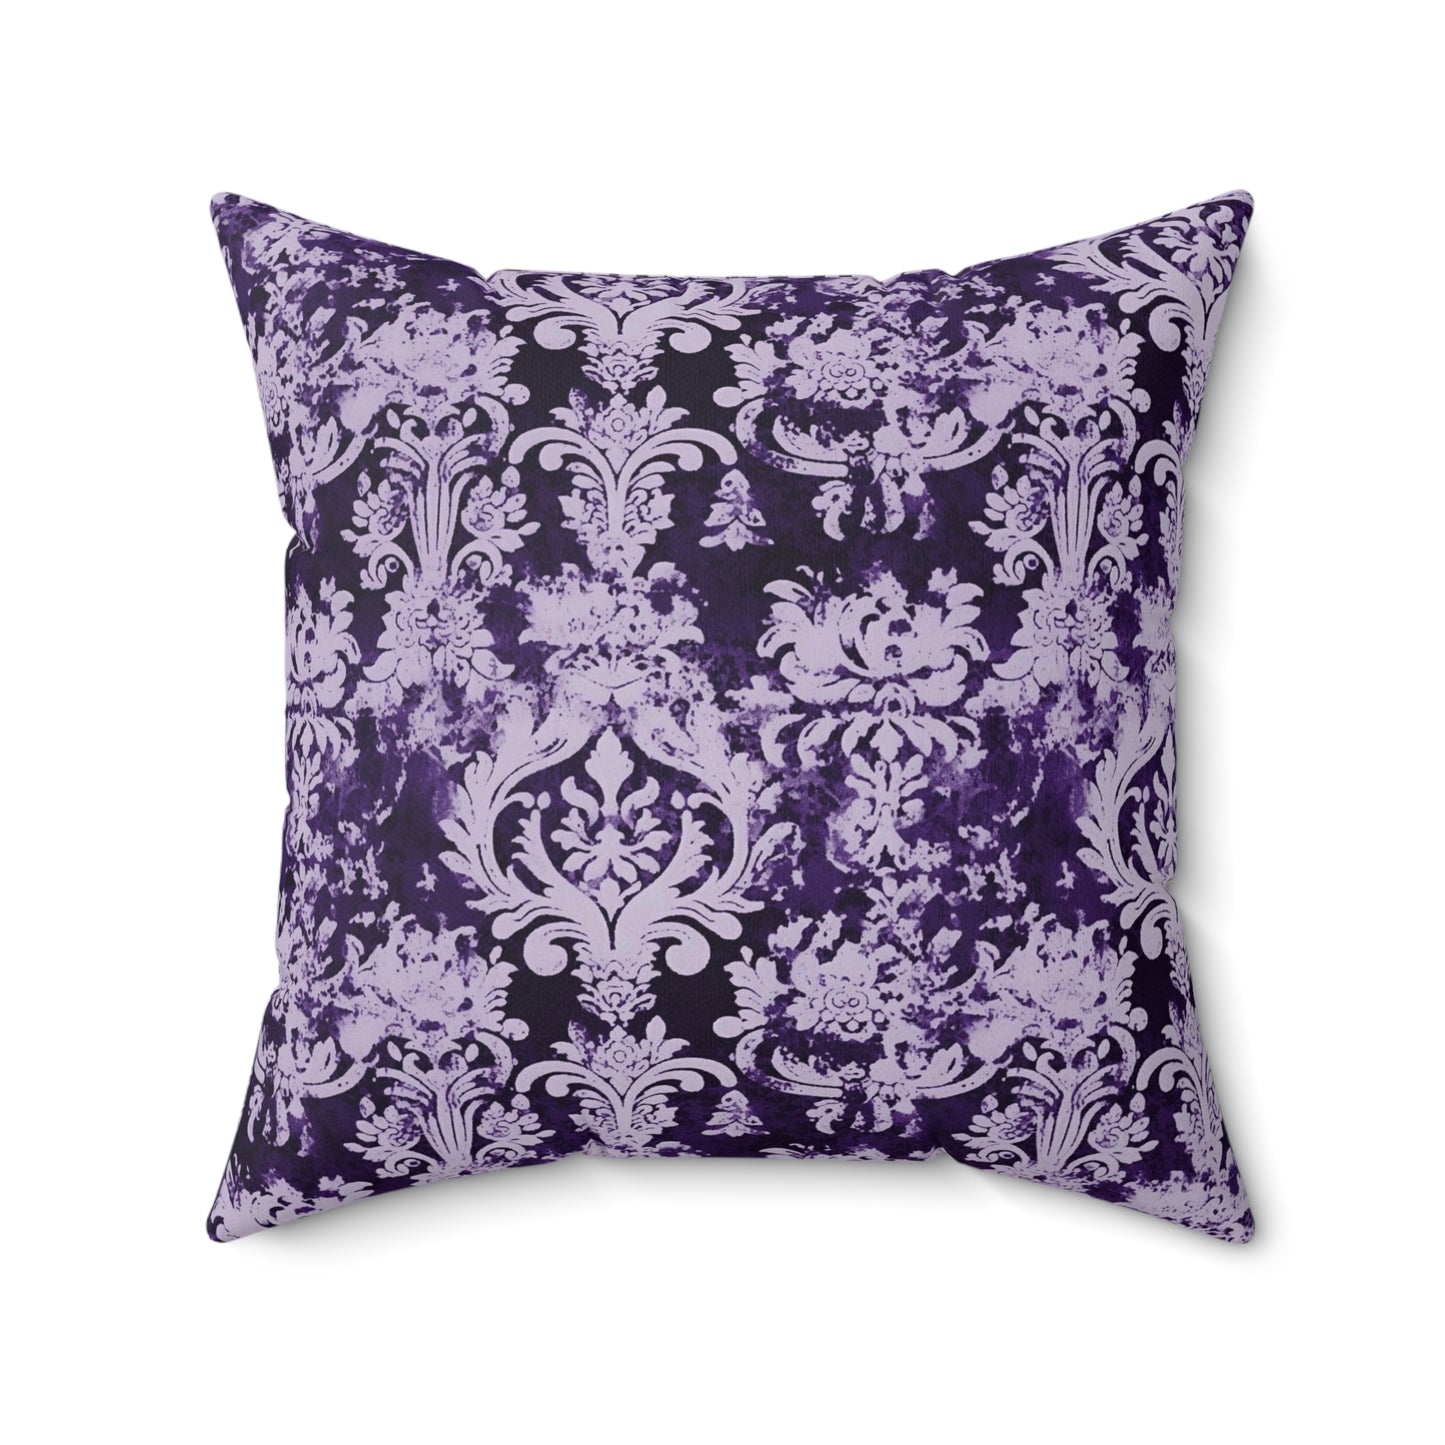 Vintage Purple Damask 51 - Beautiful, Shabby Chic, Boho, Fun - Faux Suede Square Pillow